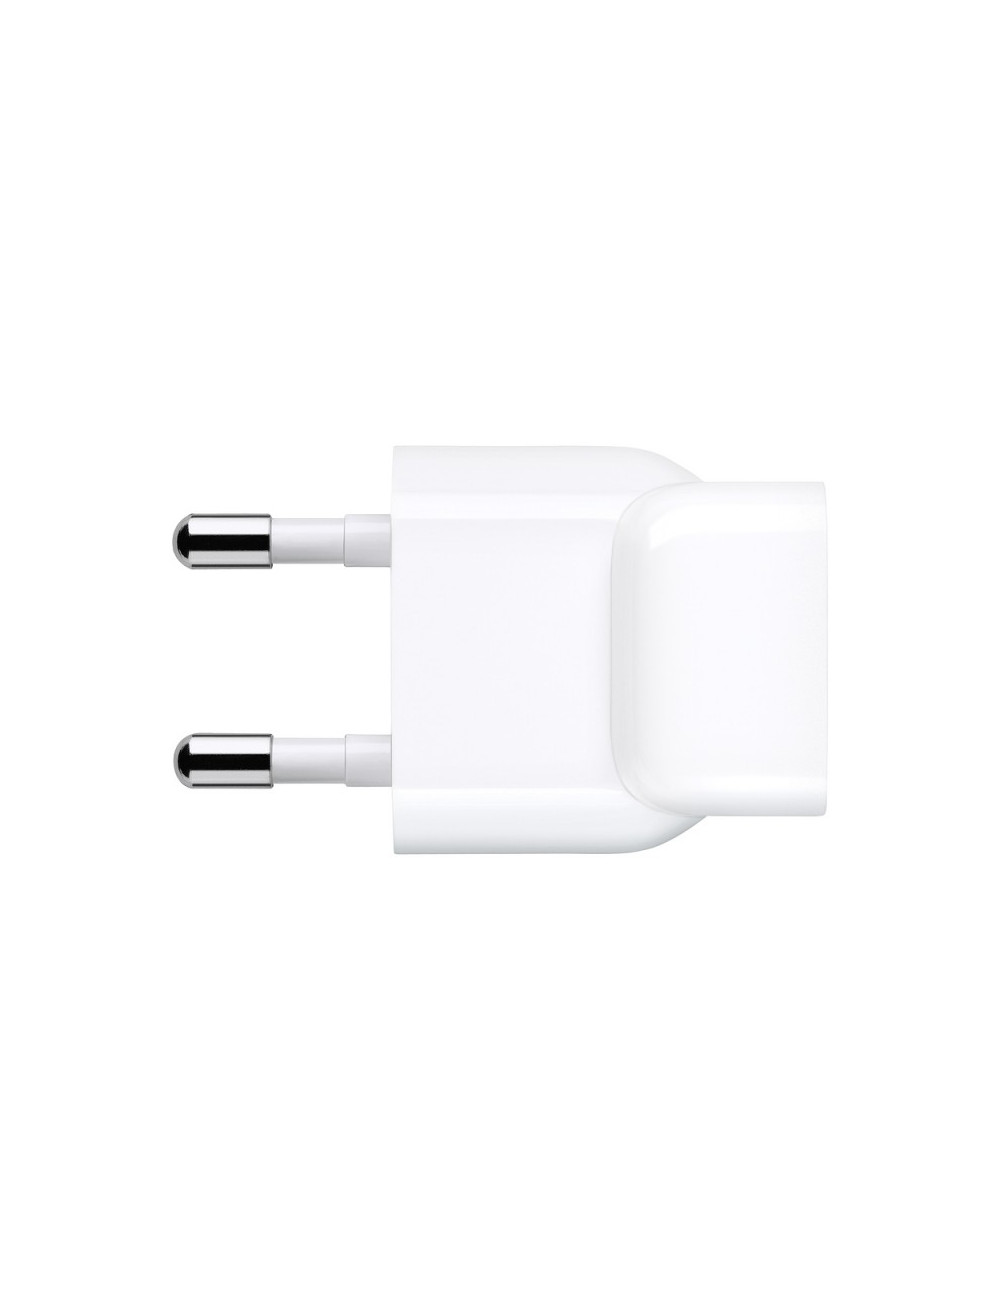 Apple World Travel Adapter Kit Charger